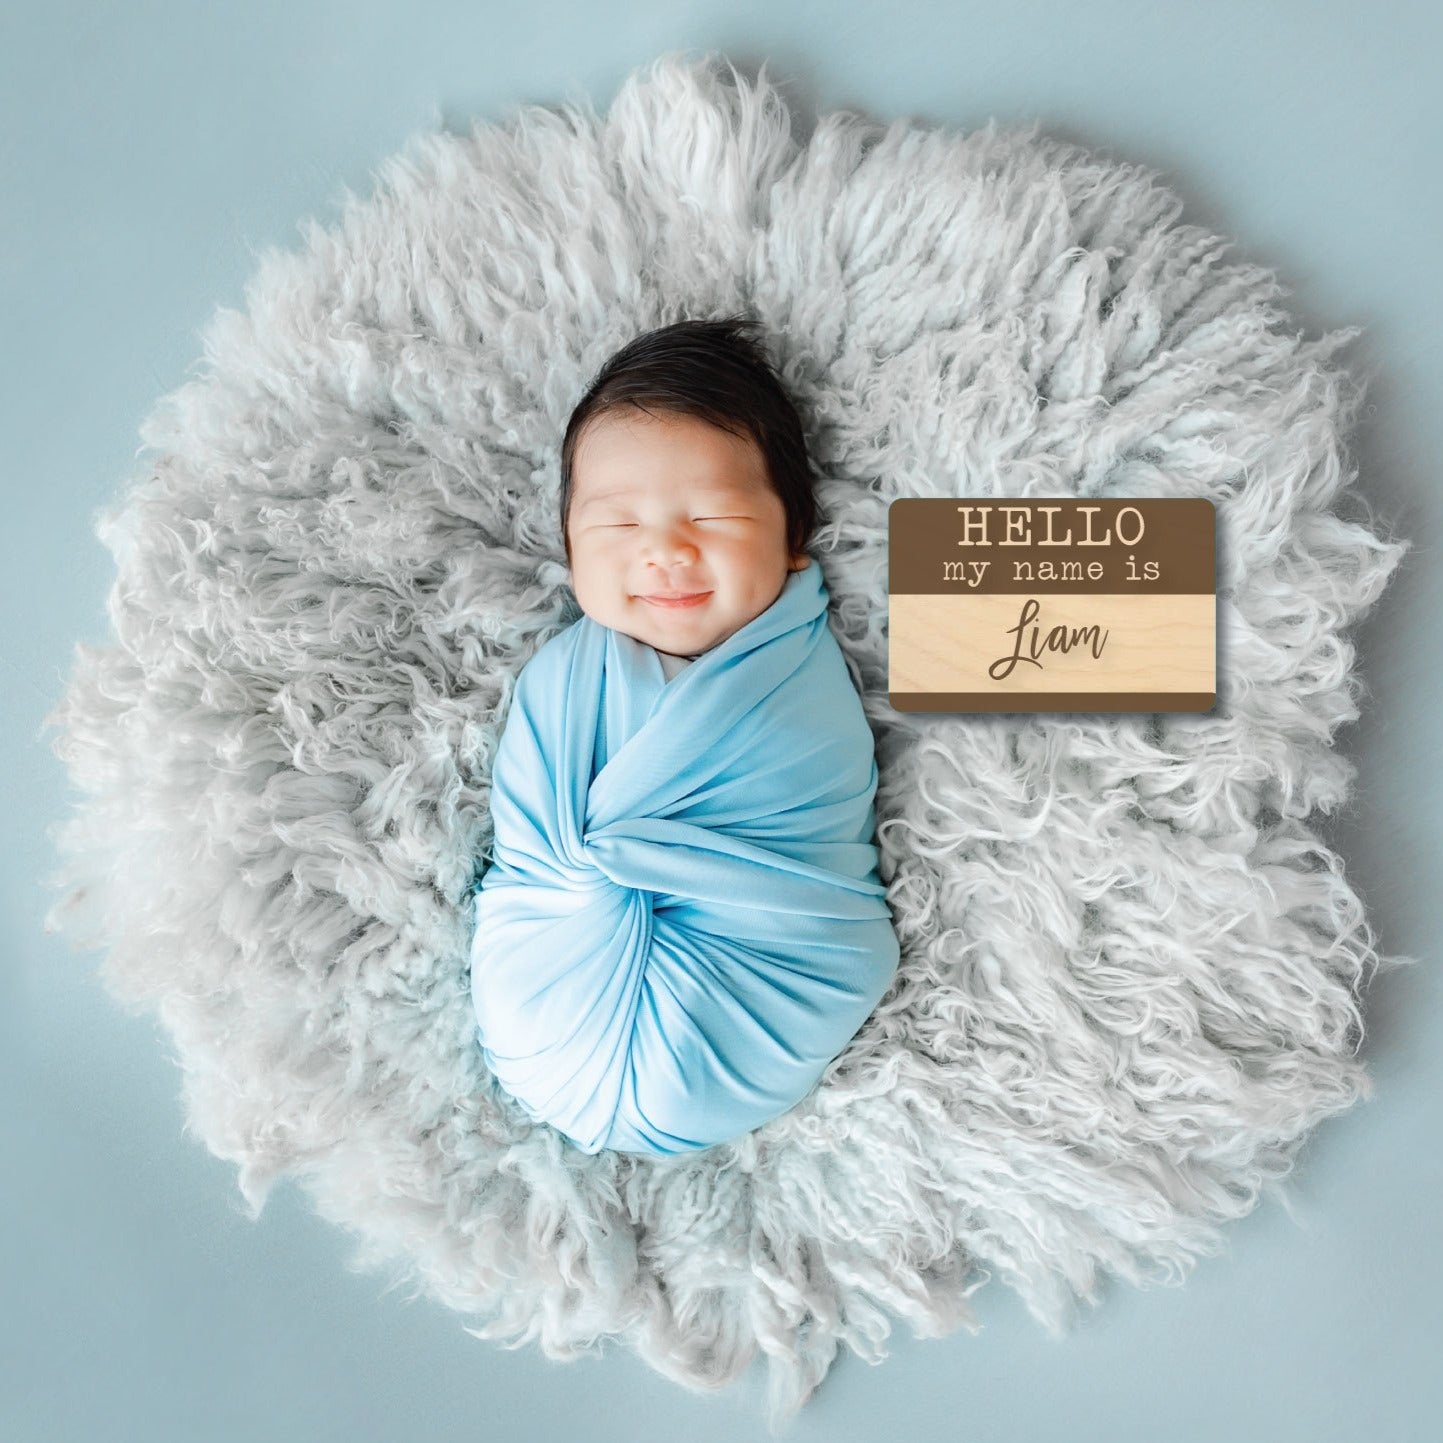 Hello I'm "___" Engraved Newborn sign with baby name